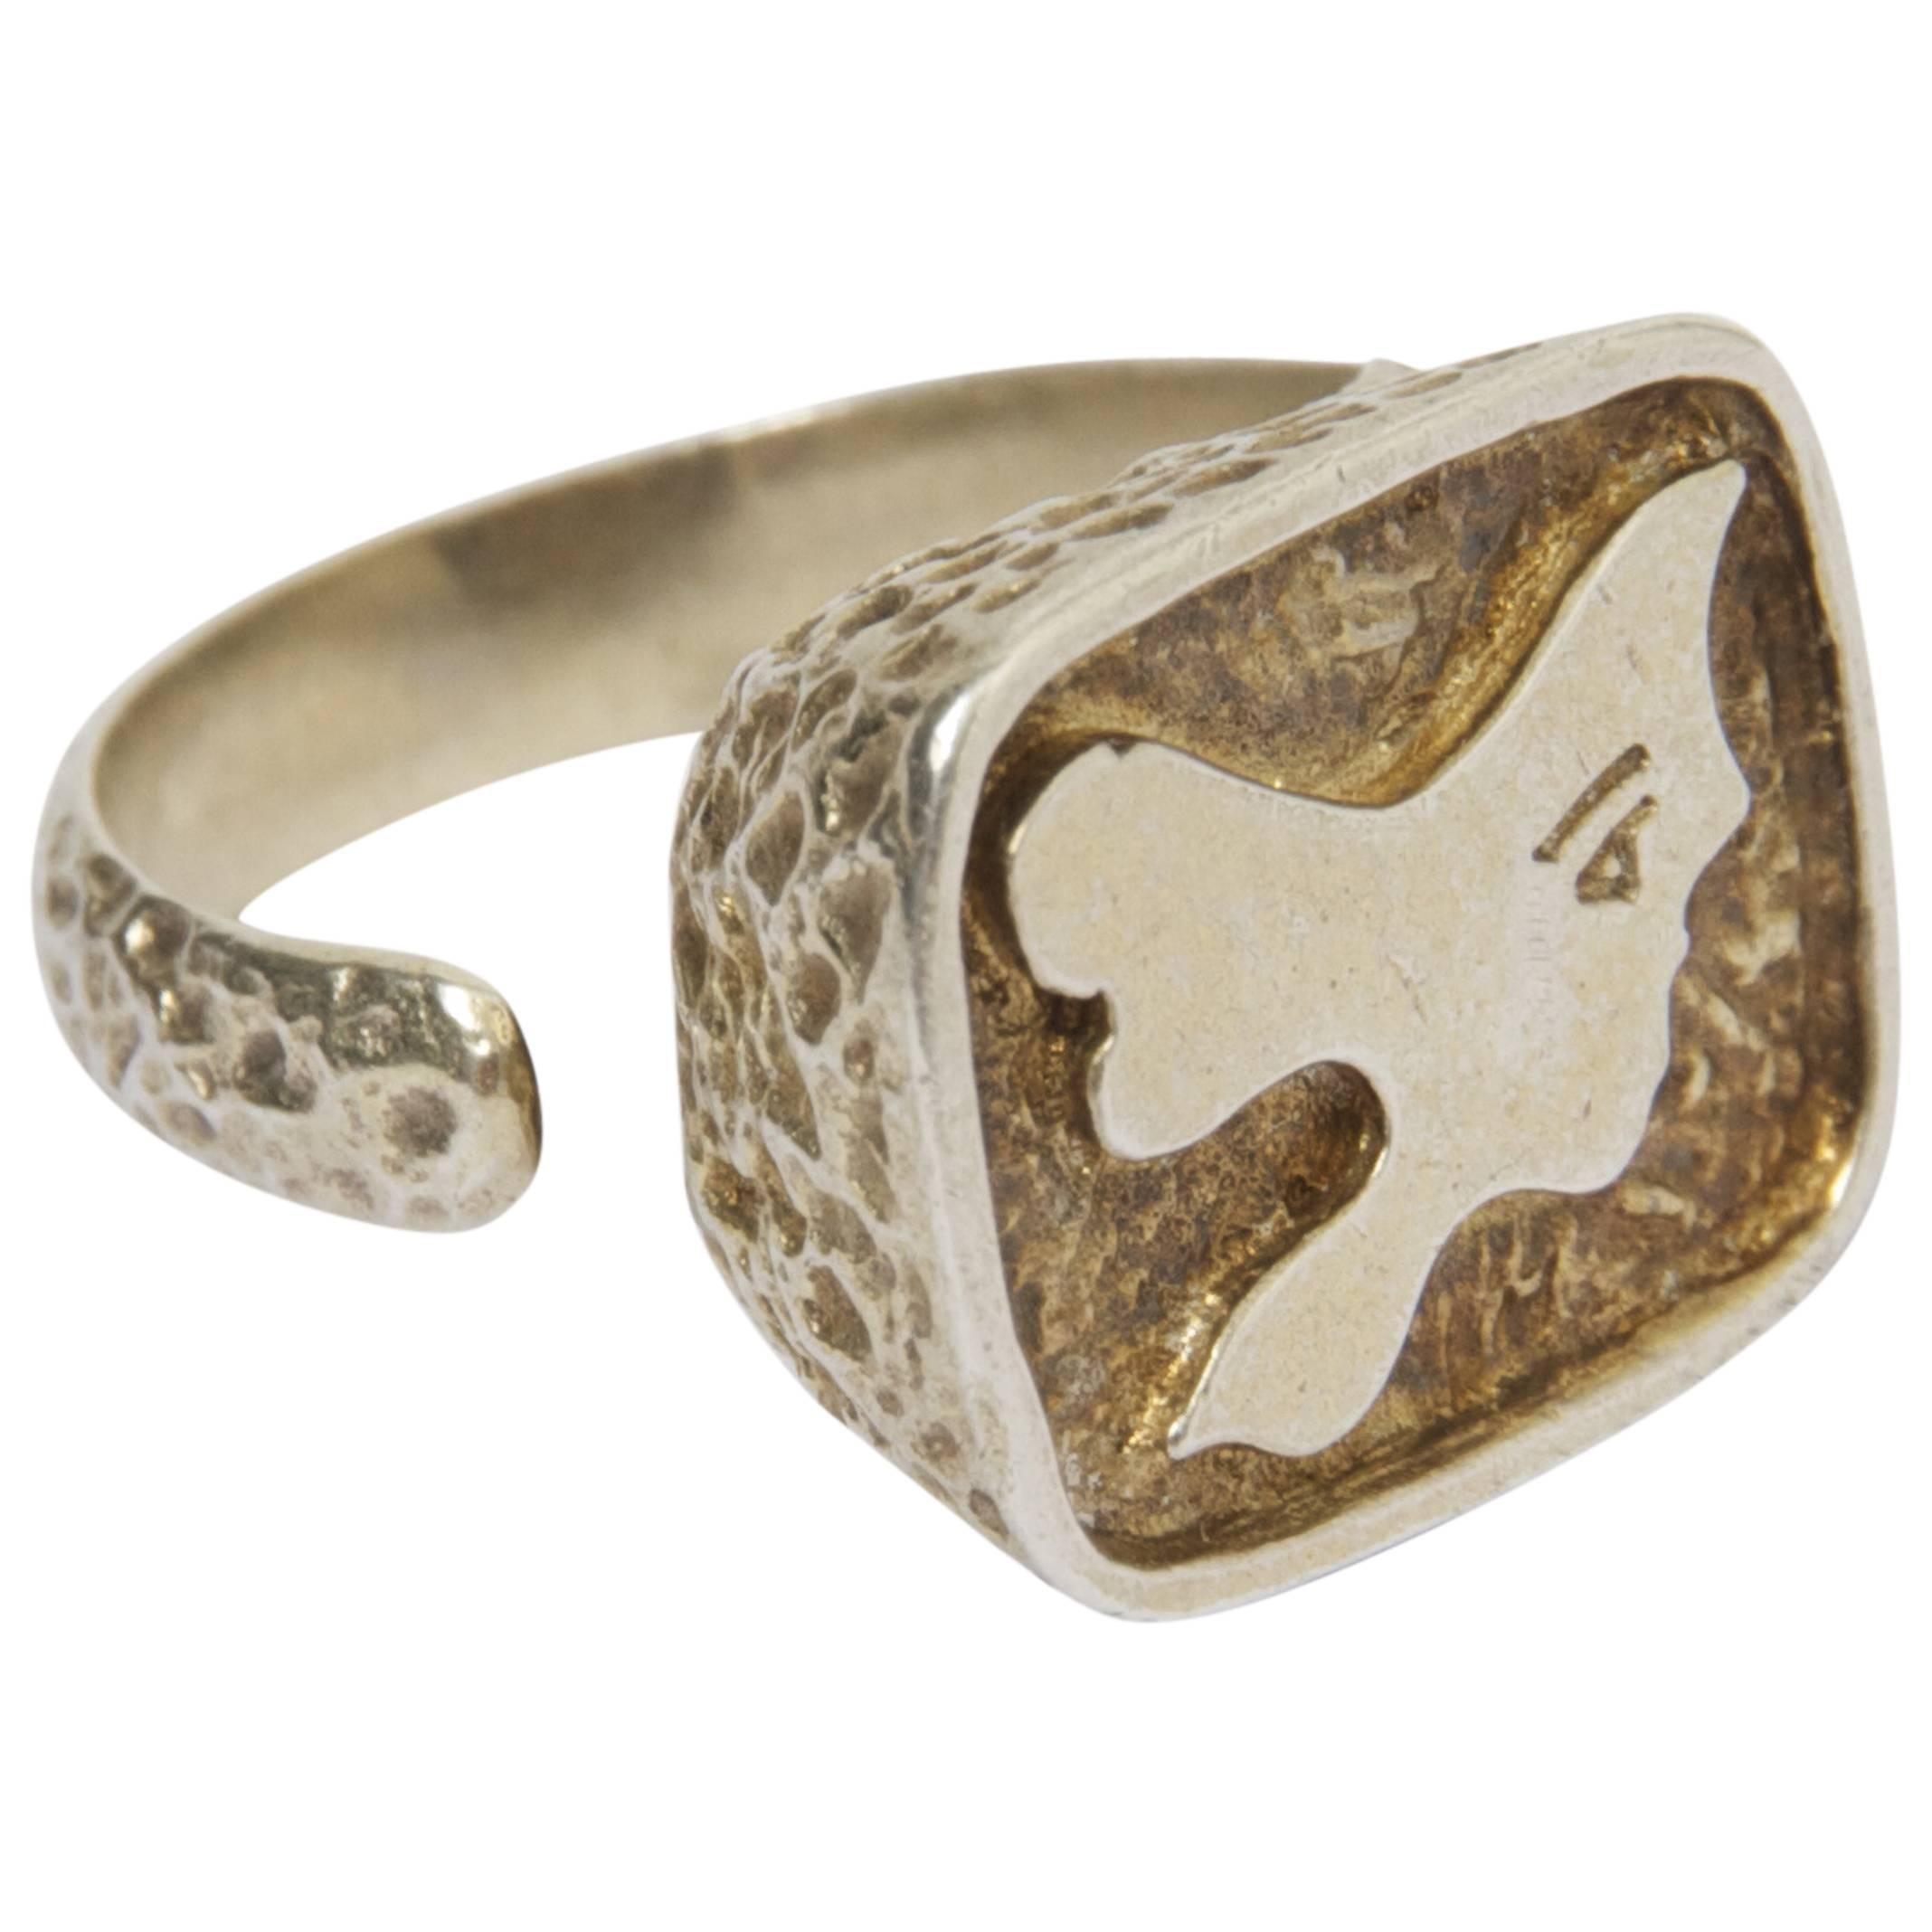 1962 Georges Braque Silver "Circe" Ring